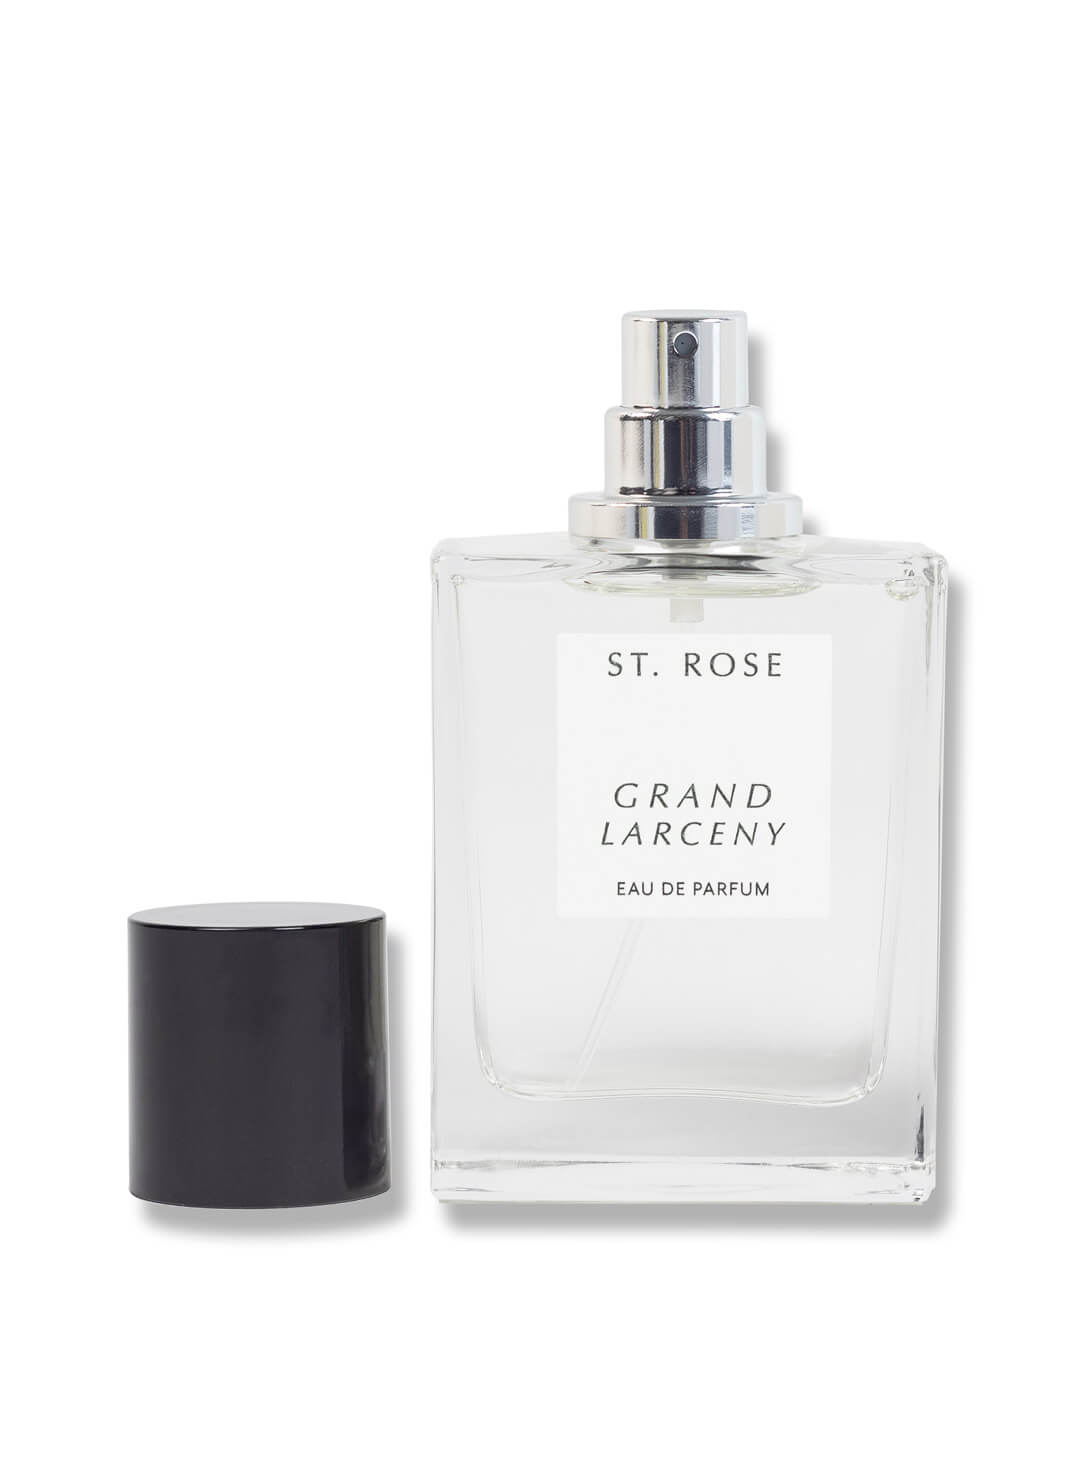 St. Rose Grand Larceny Eau De Parfum available at The New Trend